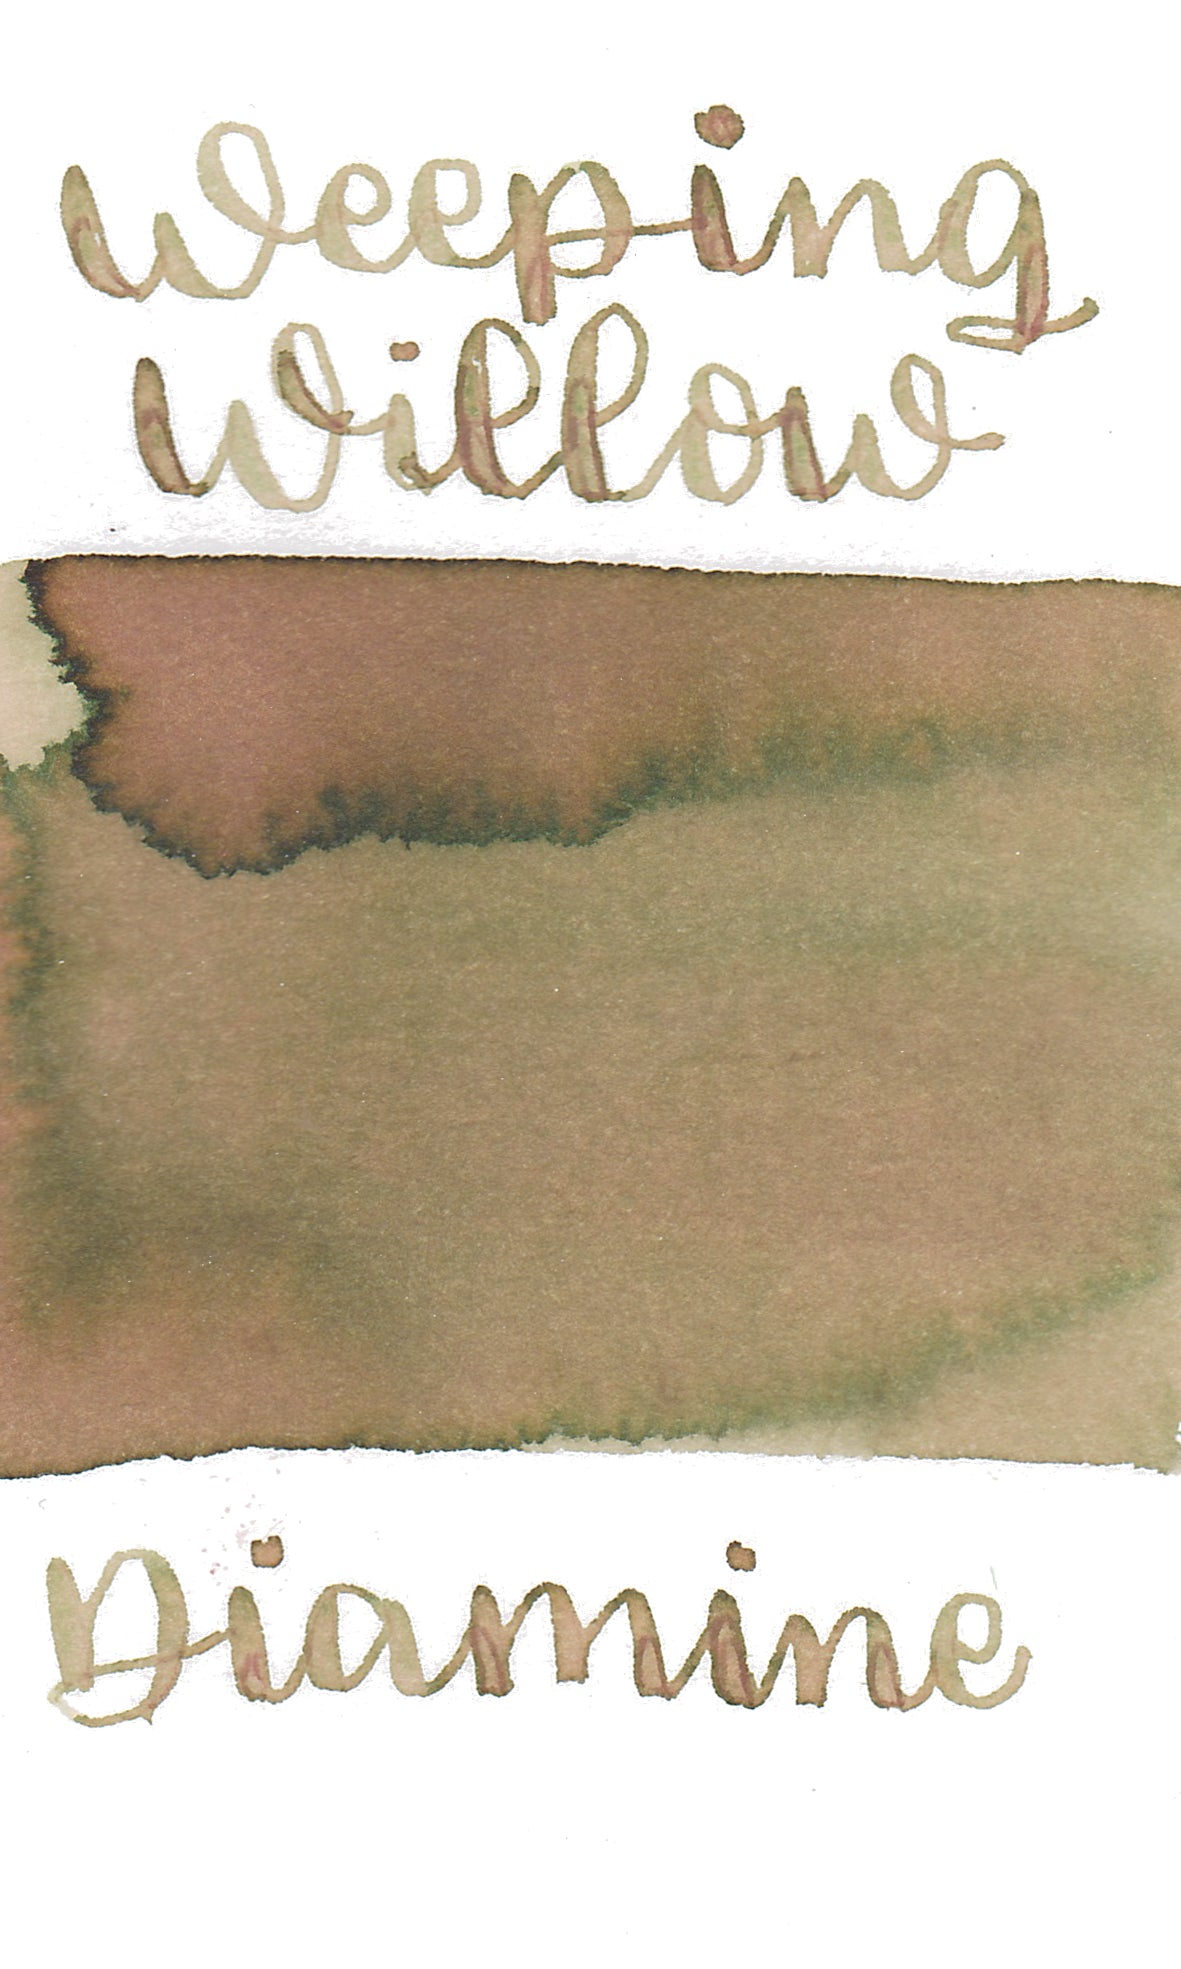 Diamine Purple Edition Standard Weeping Willow